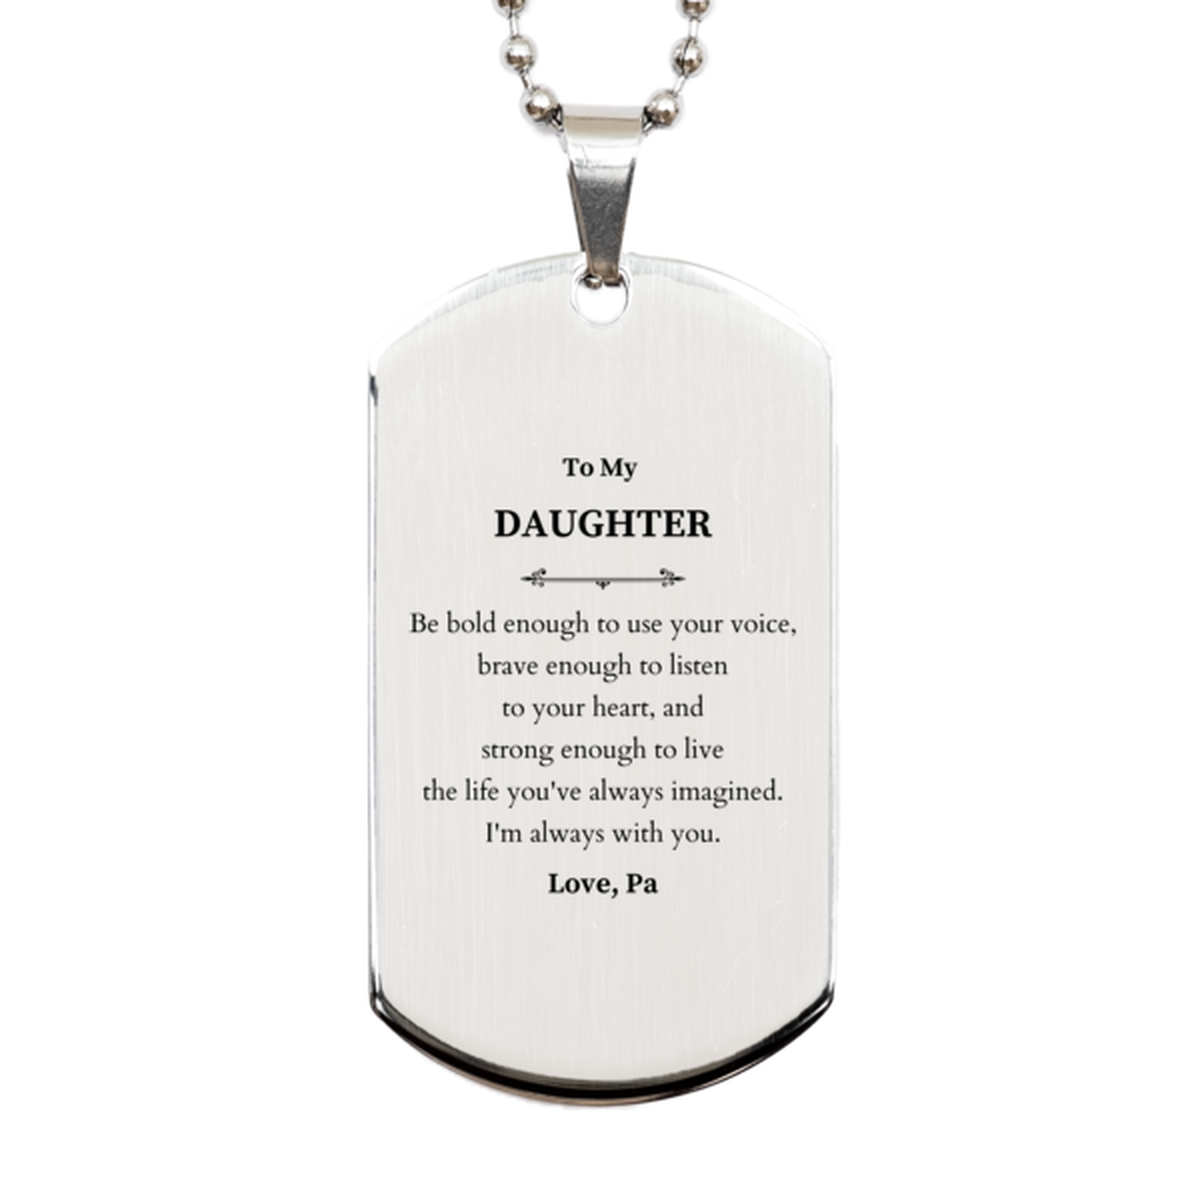 Keepsake Daughter Silver Dog Tag Gift Idea Graduation Christmas Birthday Daughter from Pa, Daughter Be bold enough to use your voice, brave enough to listen to your heart. Love, Pa